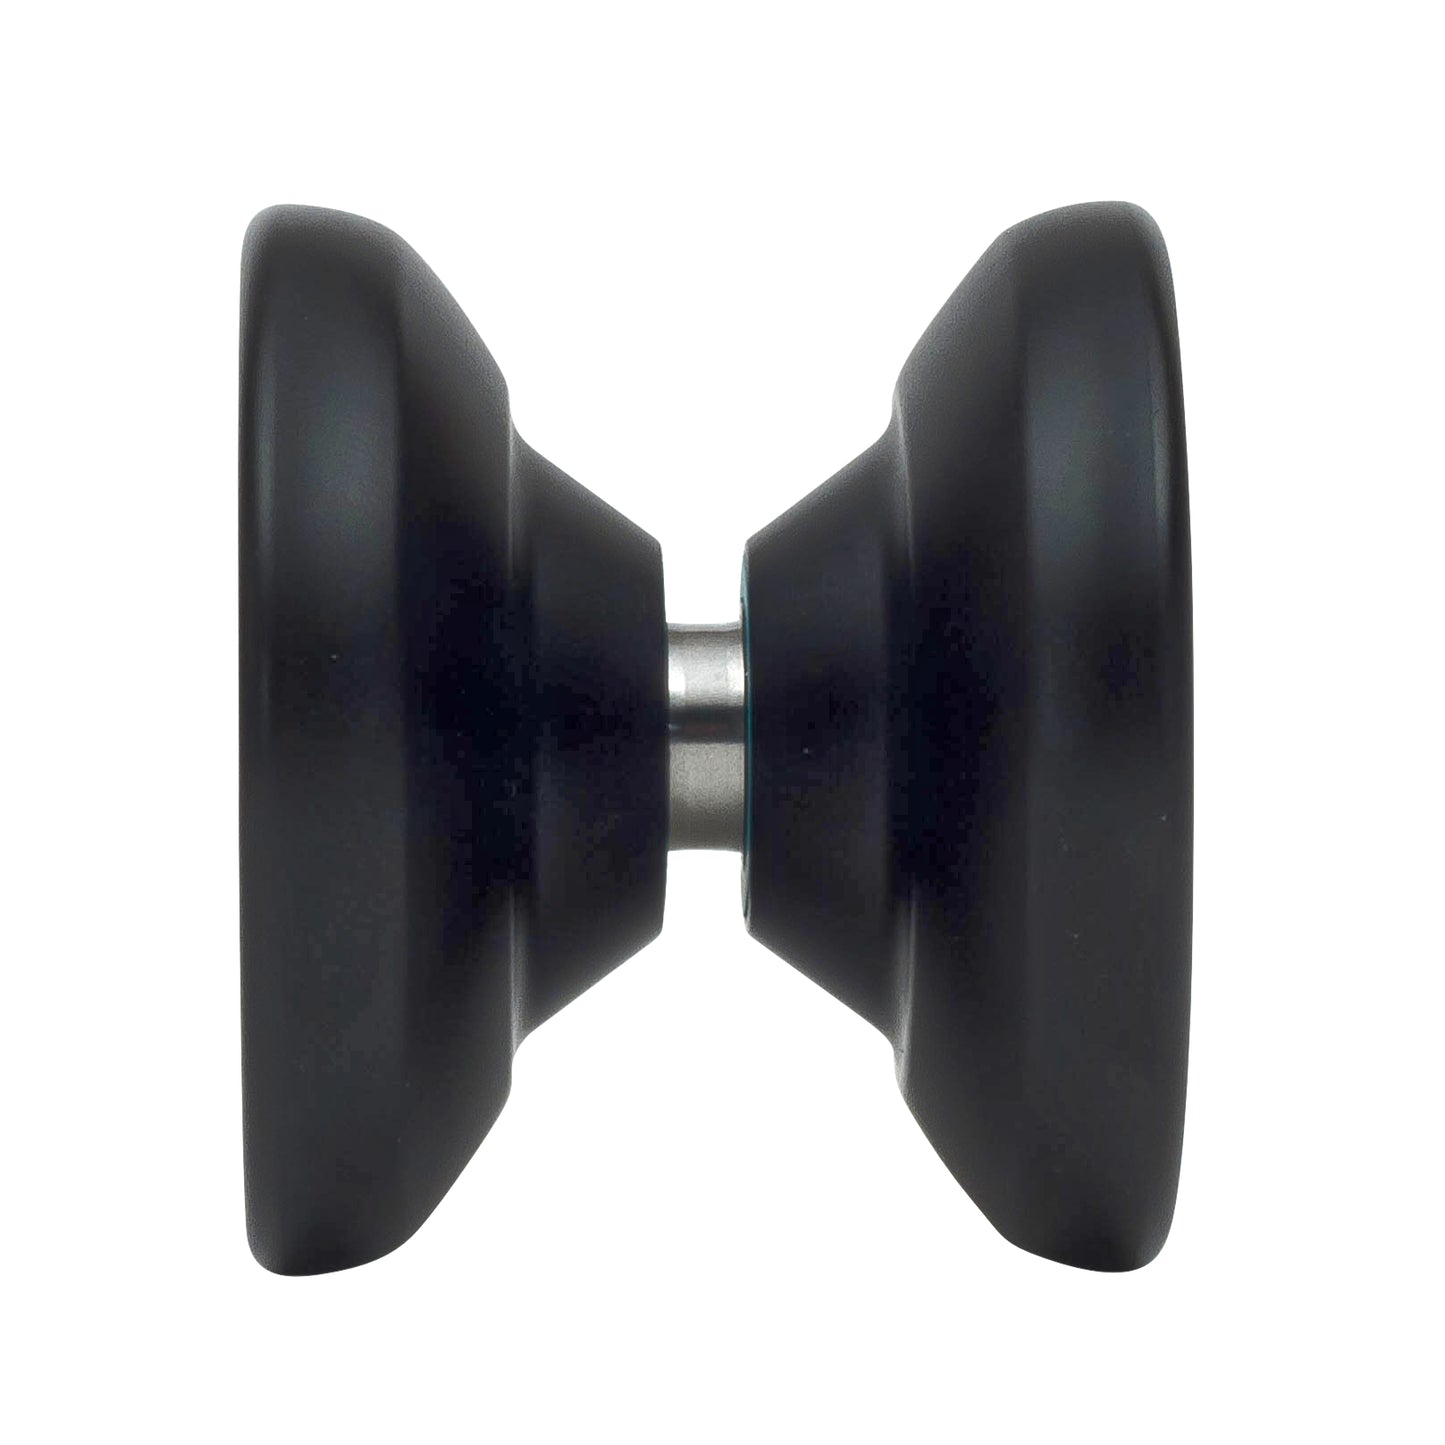 Shutter Wide Angle YoYo Black front view